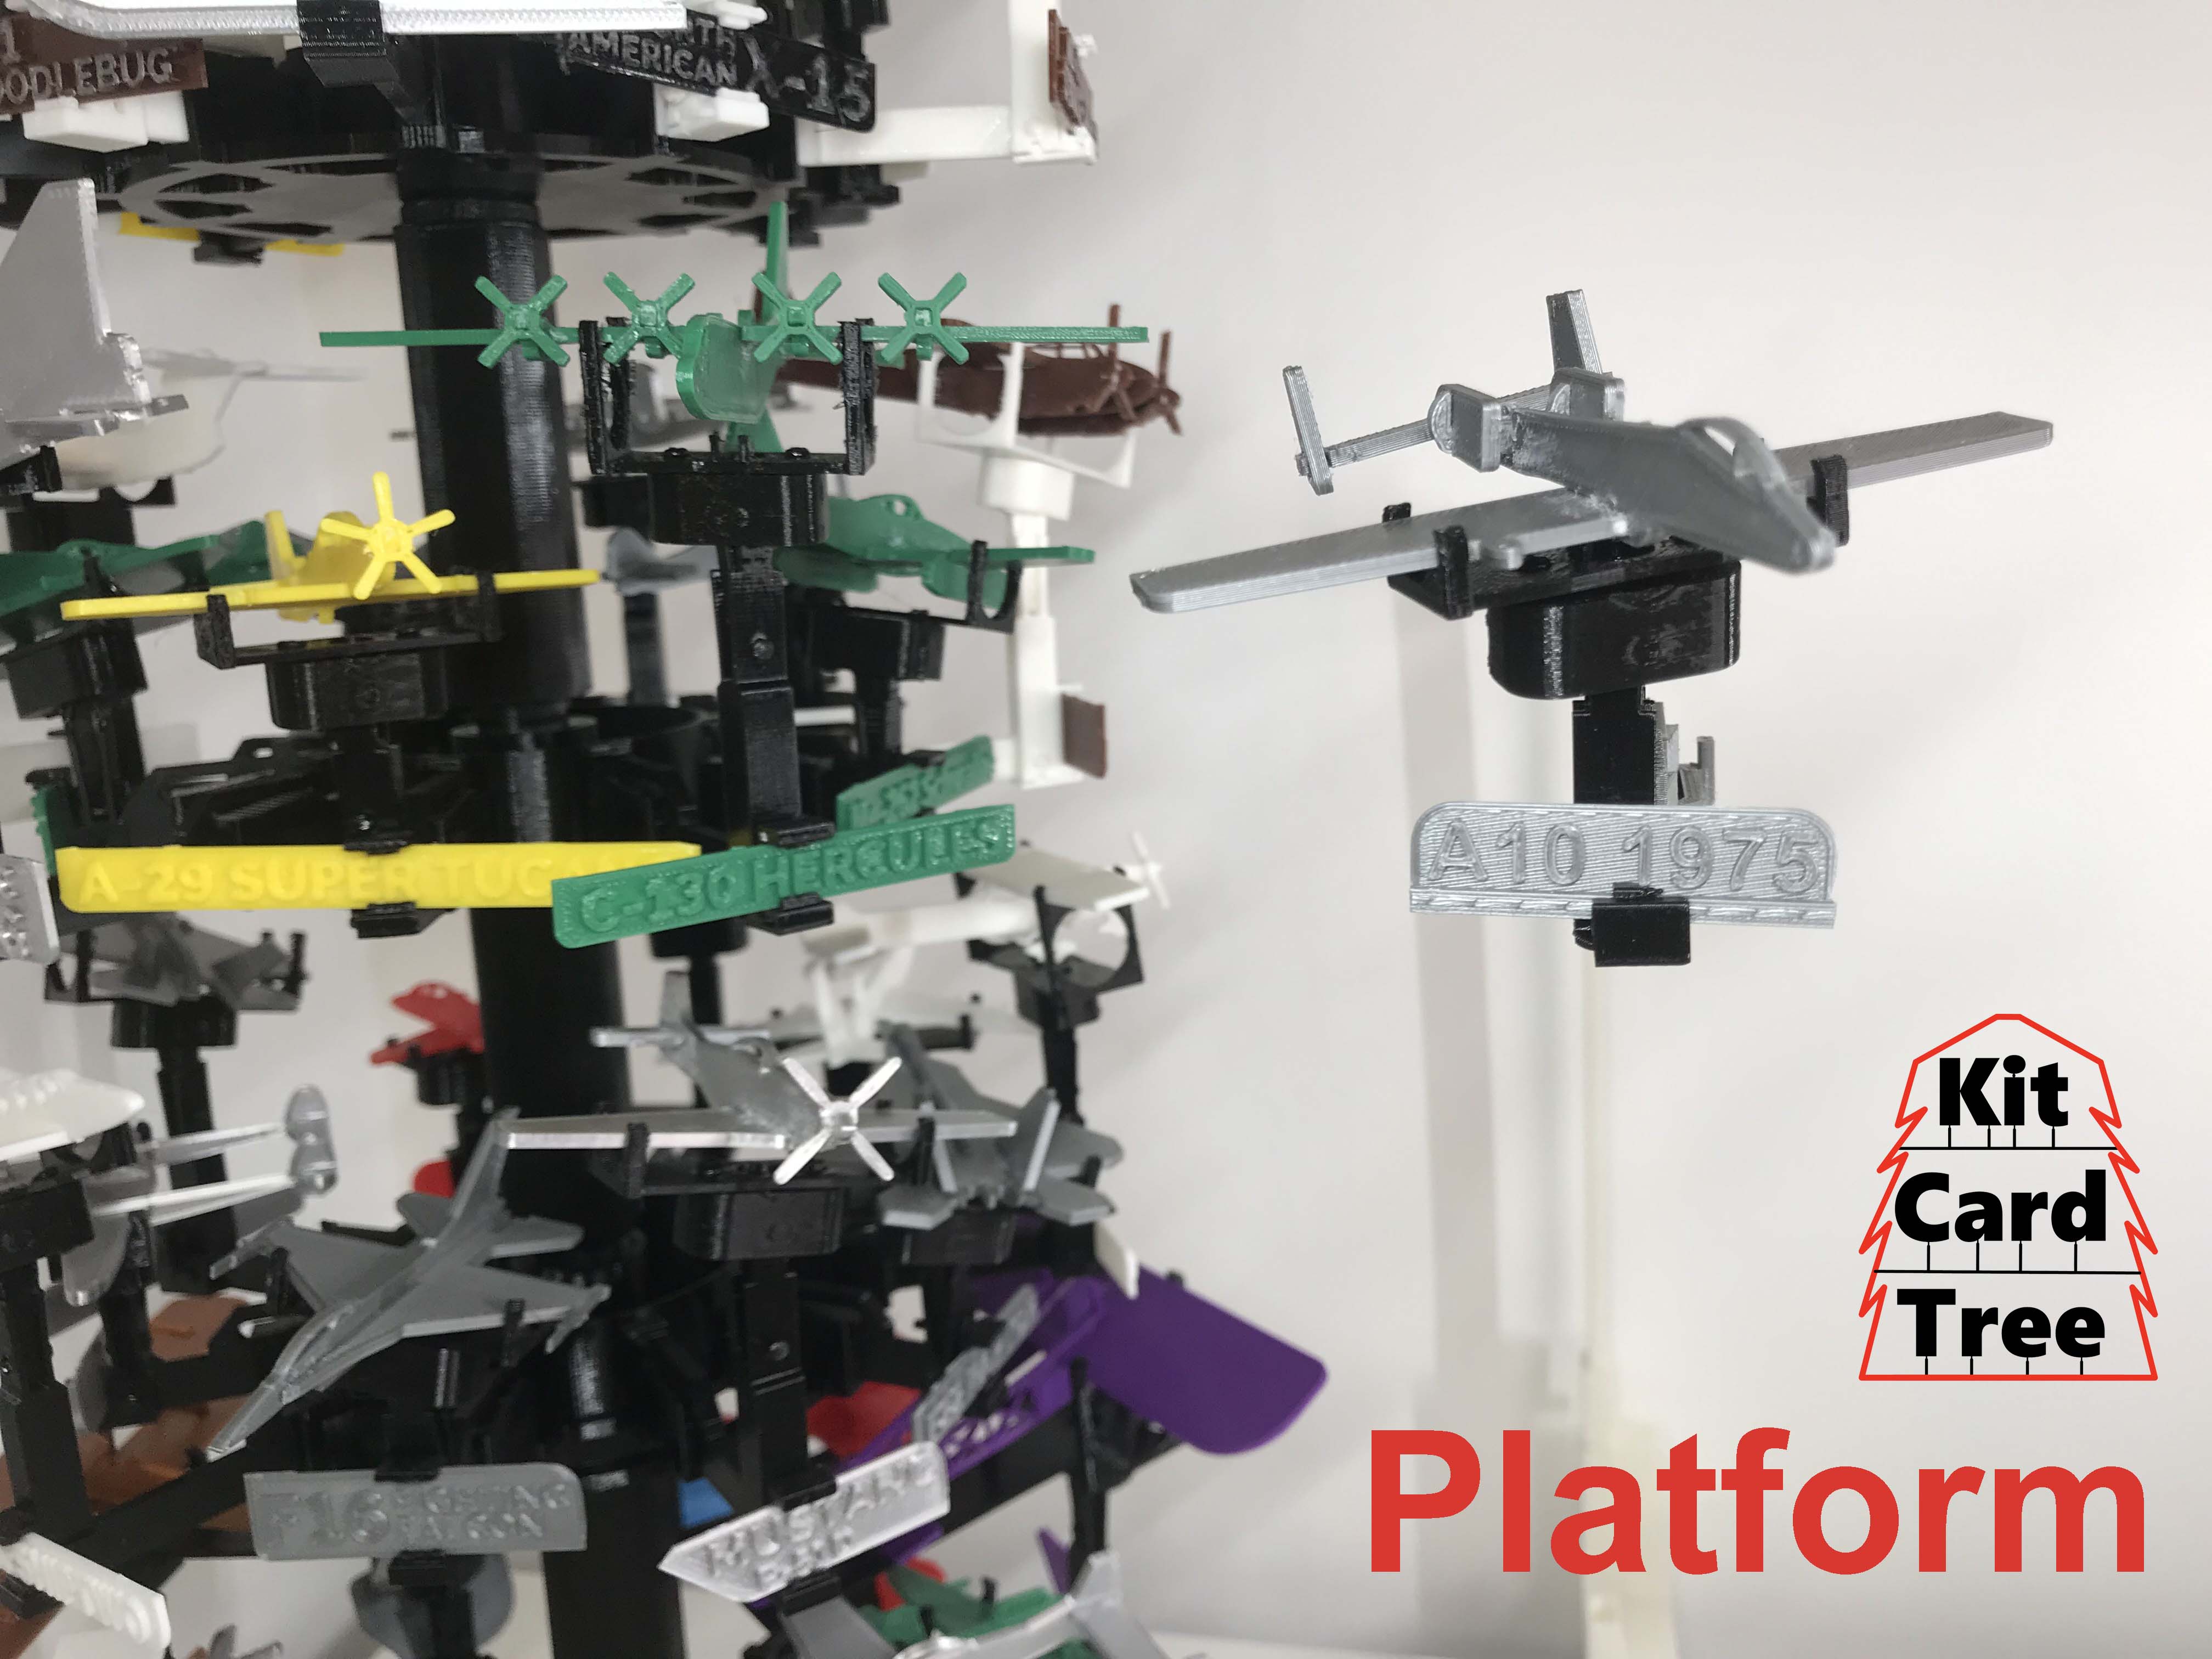 Kit Card Tree platform for the A10 Thunderbolt by Toto_28